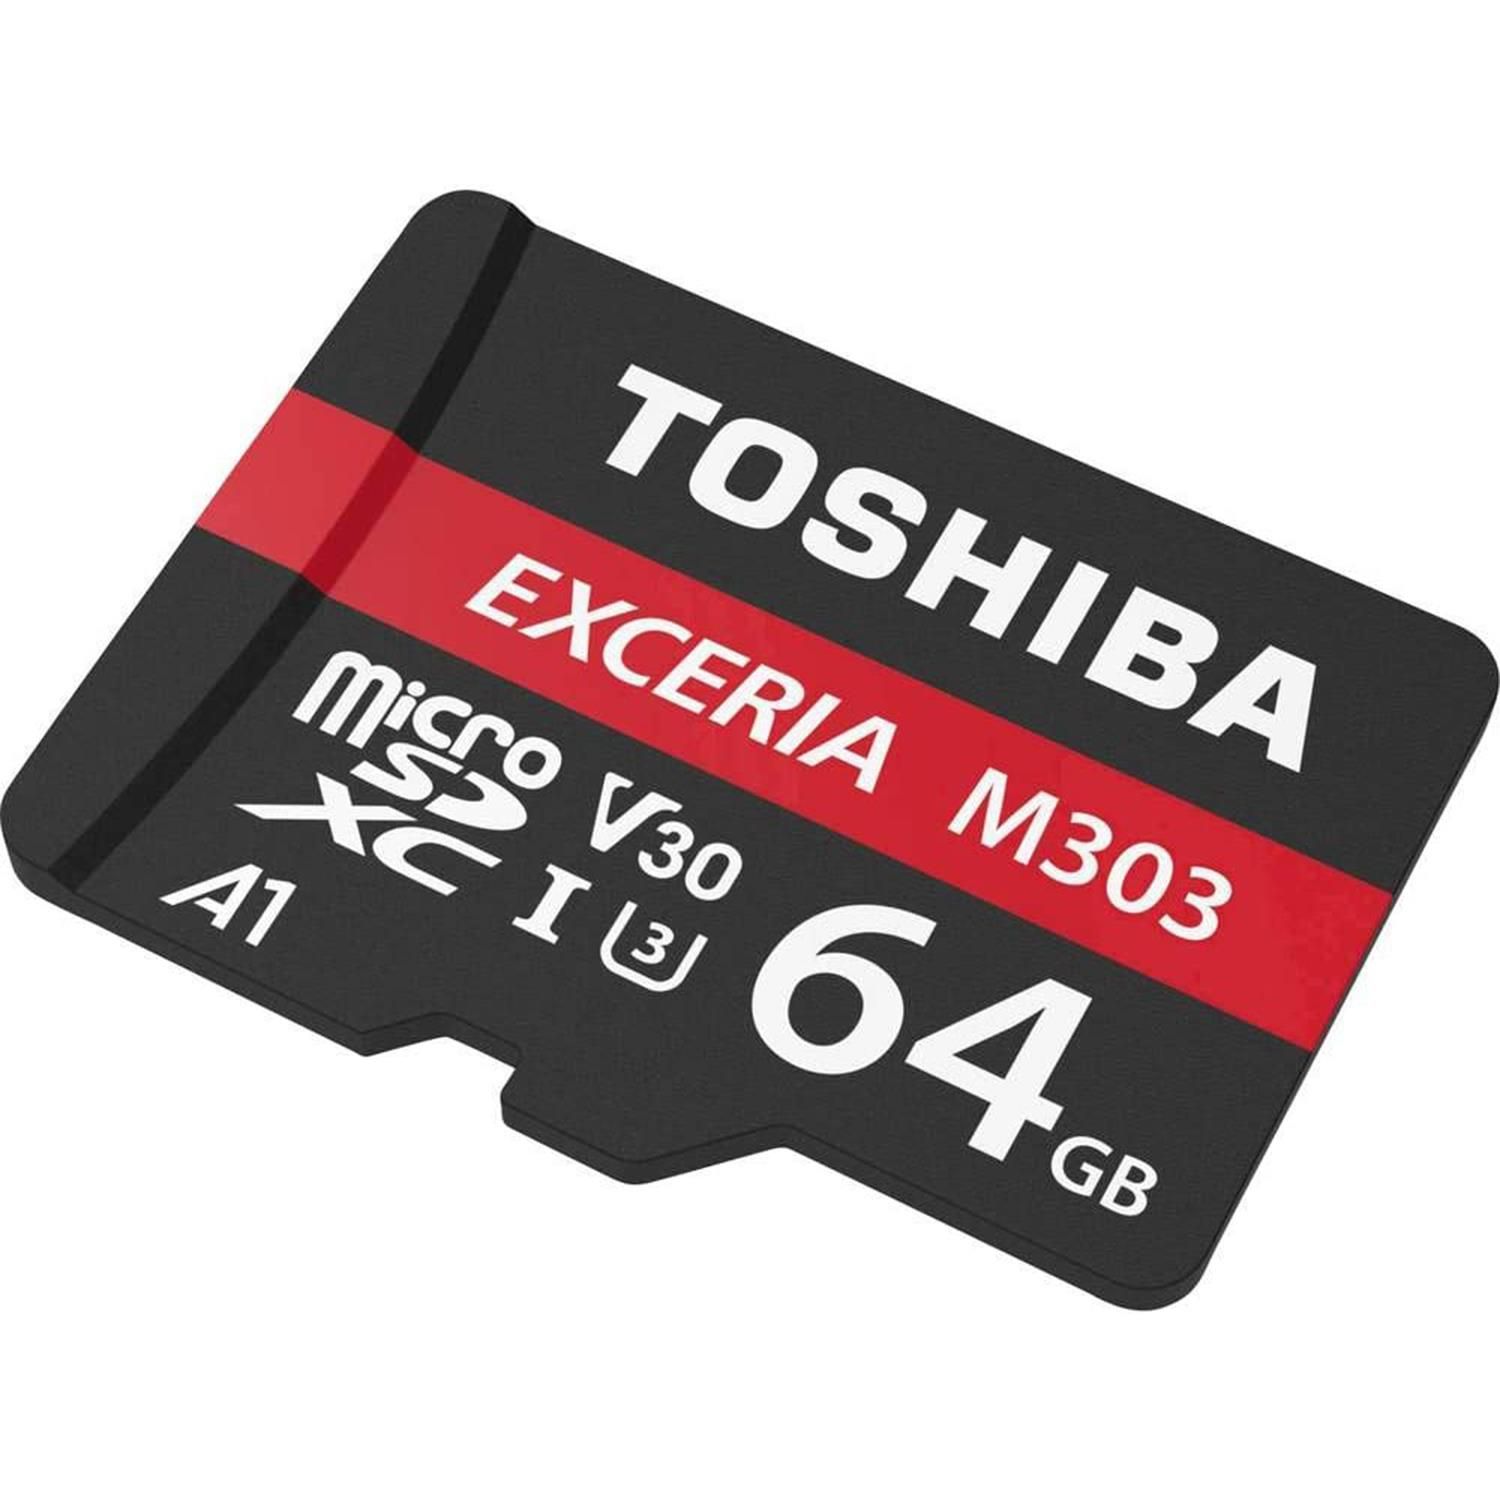 Toshiba M303 Memory Card 64GB microSDXC, 98 MB/s, Class 10, UHS-I, U3, V30, A1 with  Adapter 

Always in your pocket put the latest Toshiba SD Cards in your digital camera or your mobile device and expand your storage. Now you can take hundreds of pictures with your smartphone or store songs and videos.
Due to ultra-fast read speeds and large capacity, the Toshiba microSD card series is designed for 4K and Full HD video recording and rapid image capture. 

Features :
Specialized for 4K/full HD recording.
Designed for extreme environment usage.
Perfect for mobile devices.
Highly durable - waterproof (IPX7), shockproof and X-ray proof.

Specifications :
Package Dimension : 15x10x1cm Approx.
Read speed: Up to 90MB/s
Available capacities: 64GB
Note: Compatible with all devices supporting SDXC standards.

Package contains:1x Toshiba M303 Memory Card 64GB microSDXC, 98 MB/s, Class 10 with  Adapter 